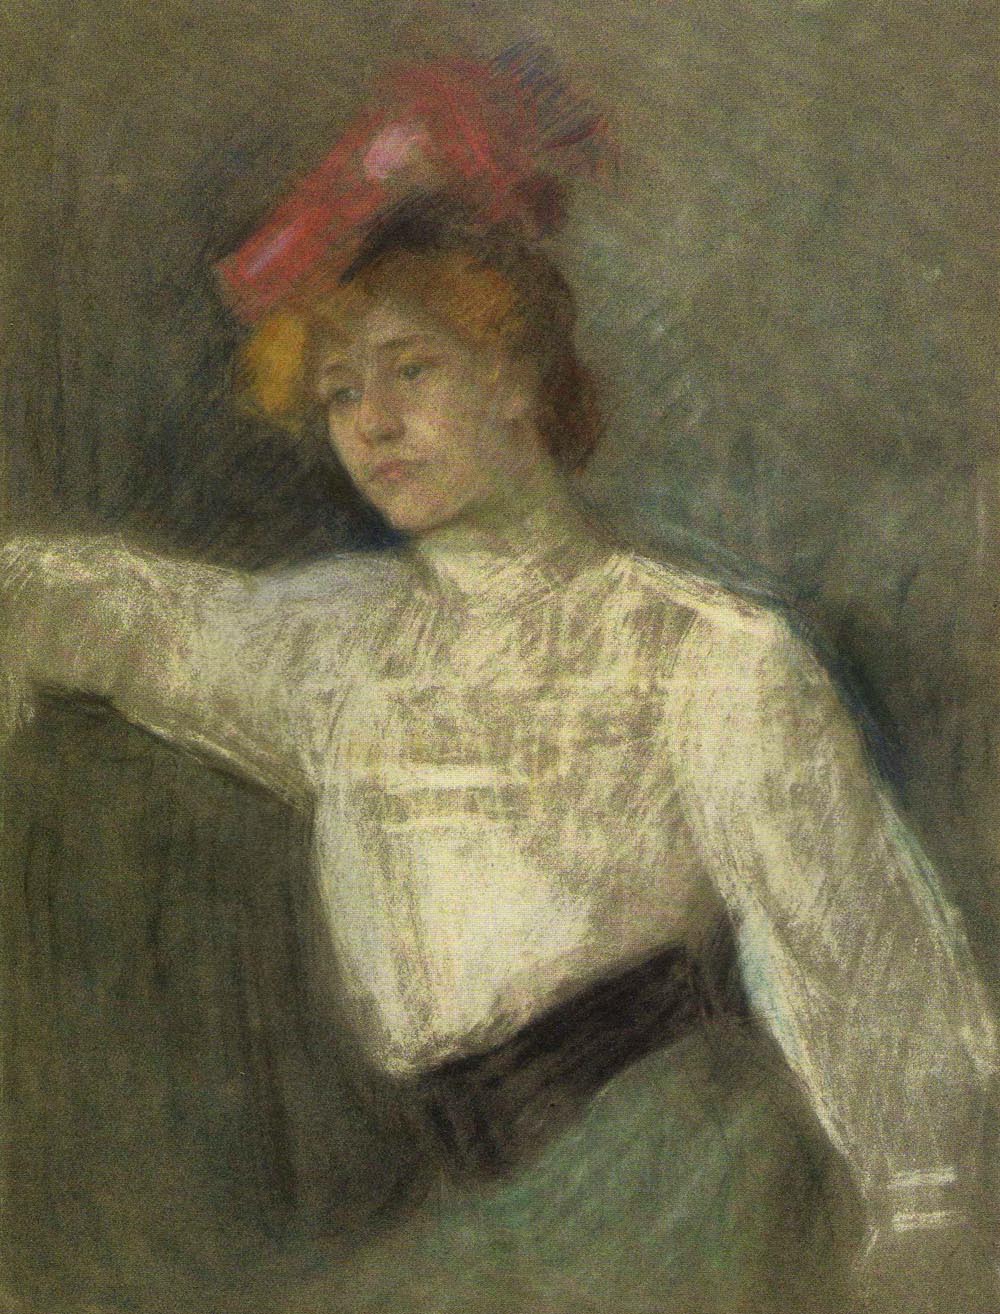 Portrait of a Woman in a Red Hat